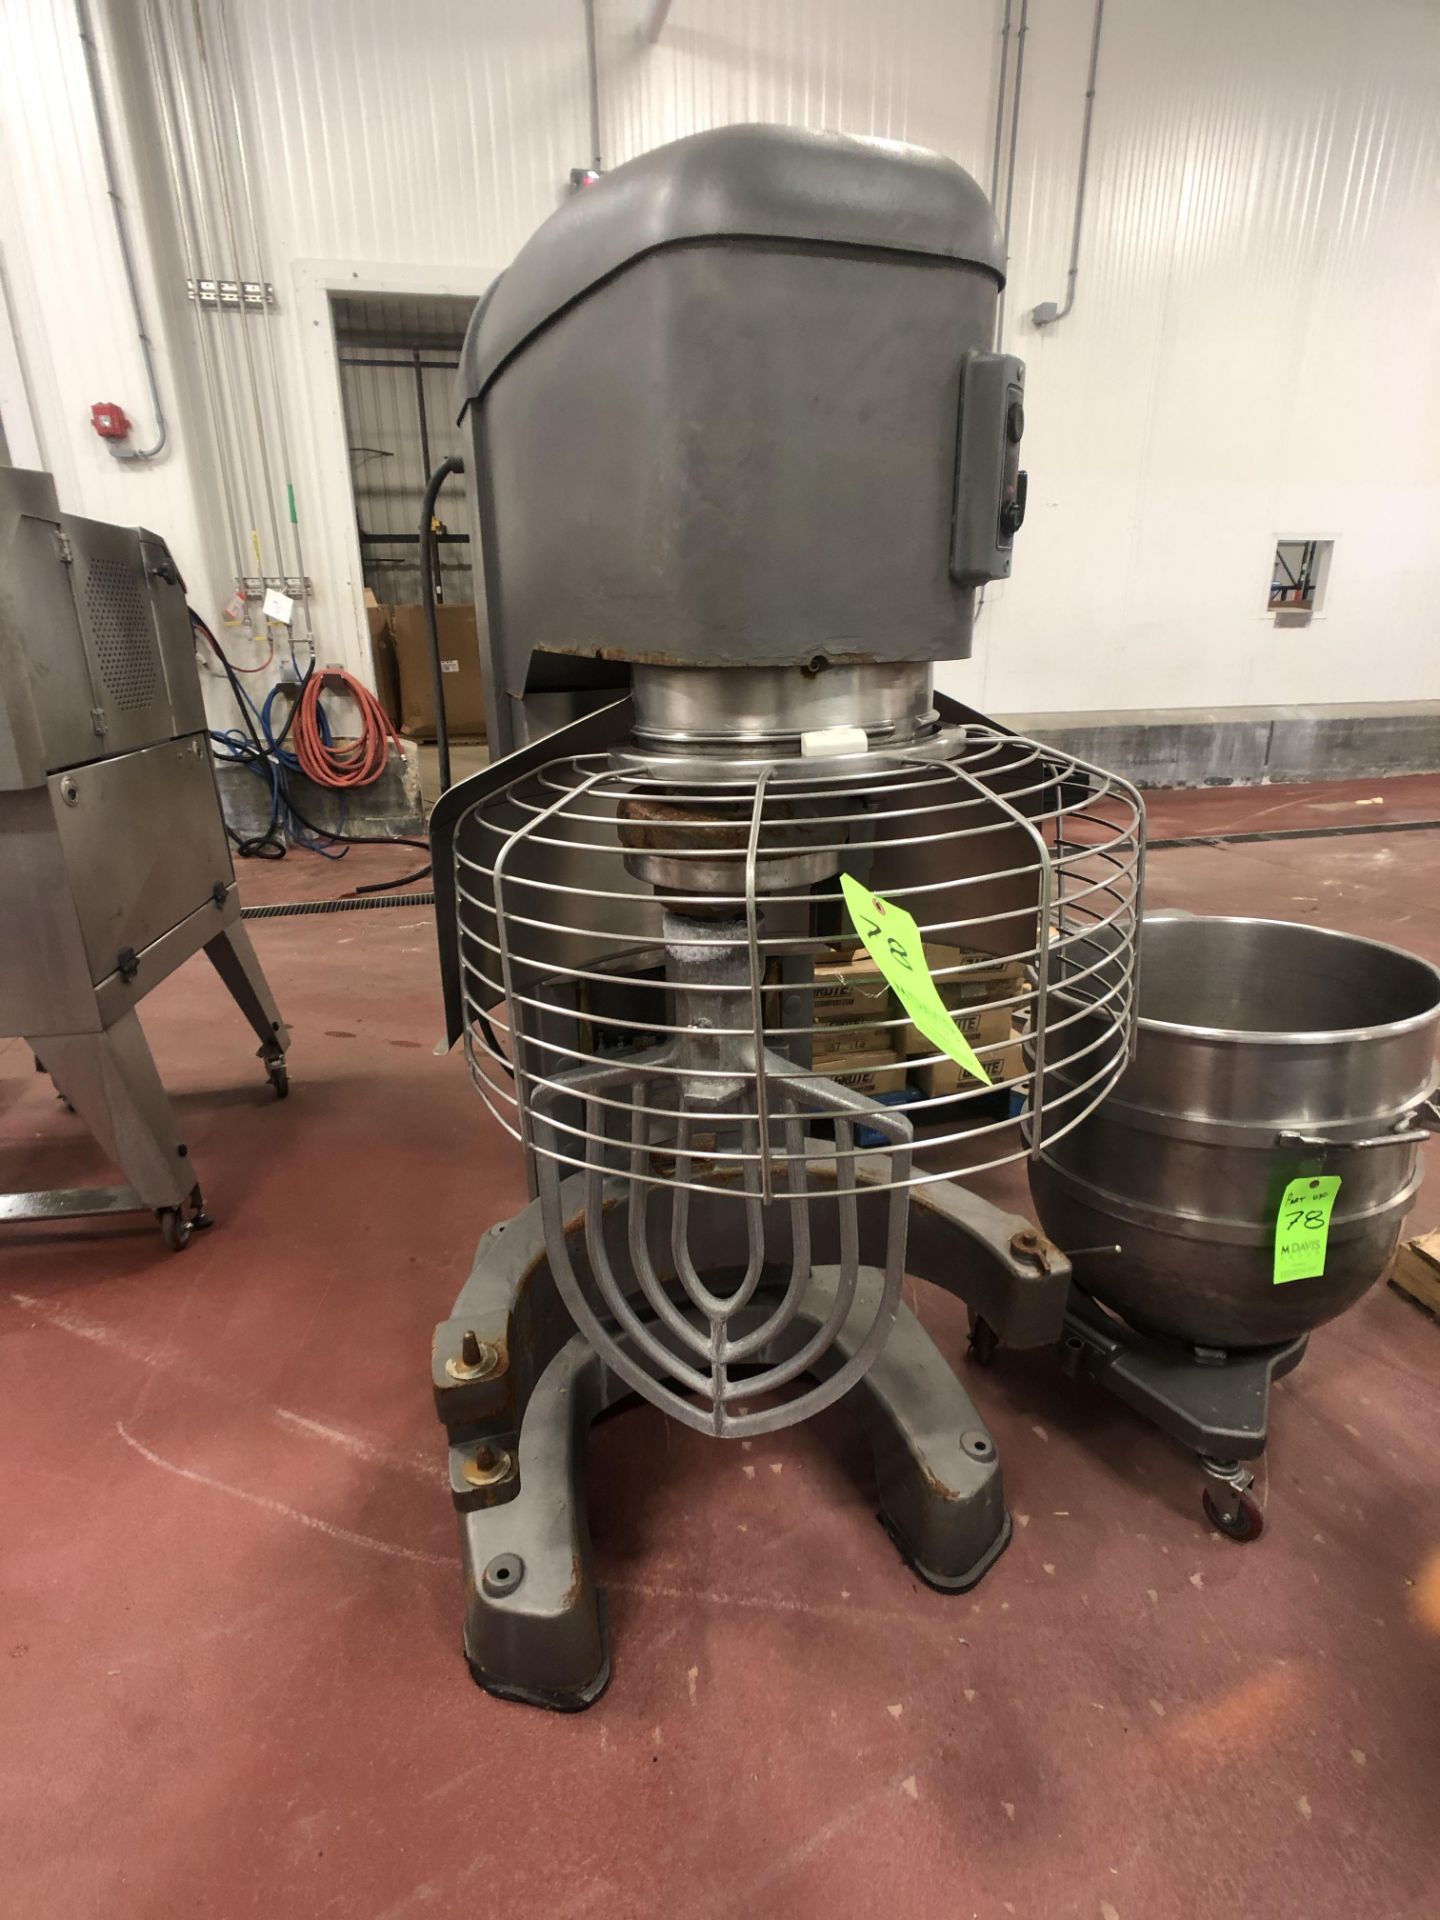 HOBART MIXER MODEL HL 1400, S/N 31-1522 206, INCLUDES BOWL 140 QT AND BEATER ATTACHMENTS - Image 2 of 6